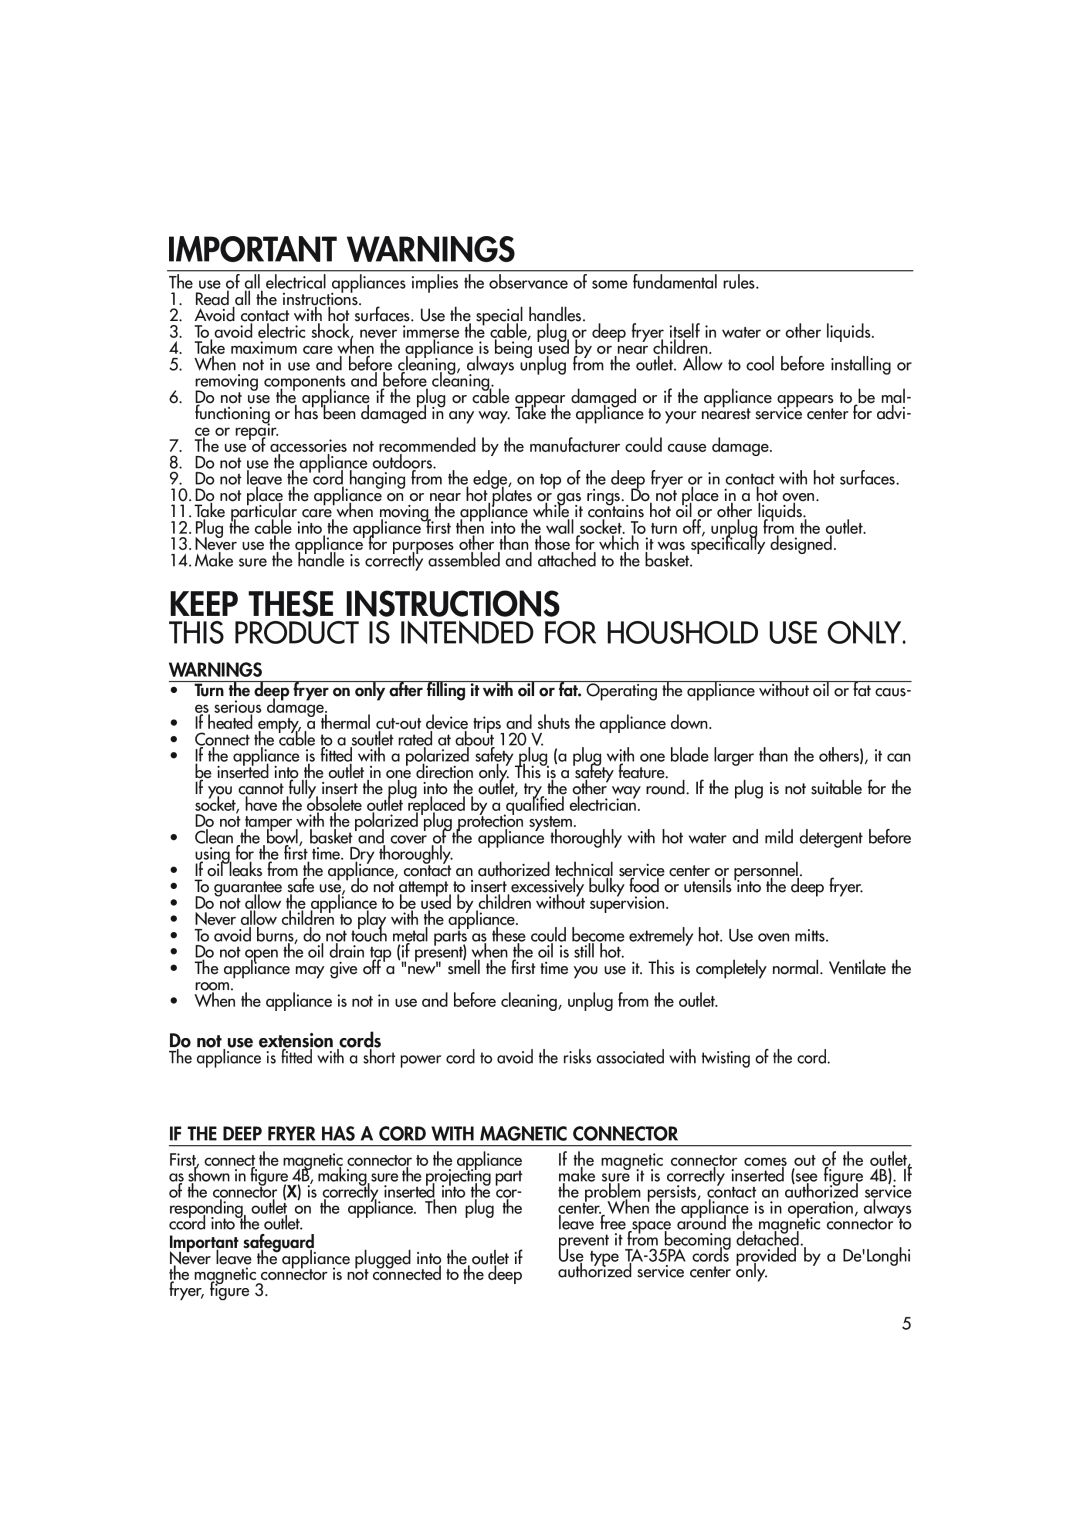 DeLonghi D14527DZ manual Do not use extension cords, Important Warnings, Keep These Instructions 